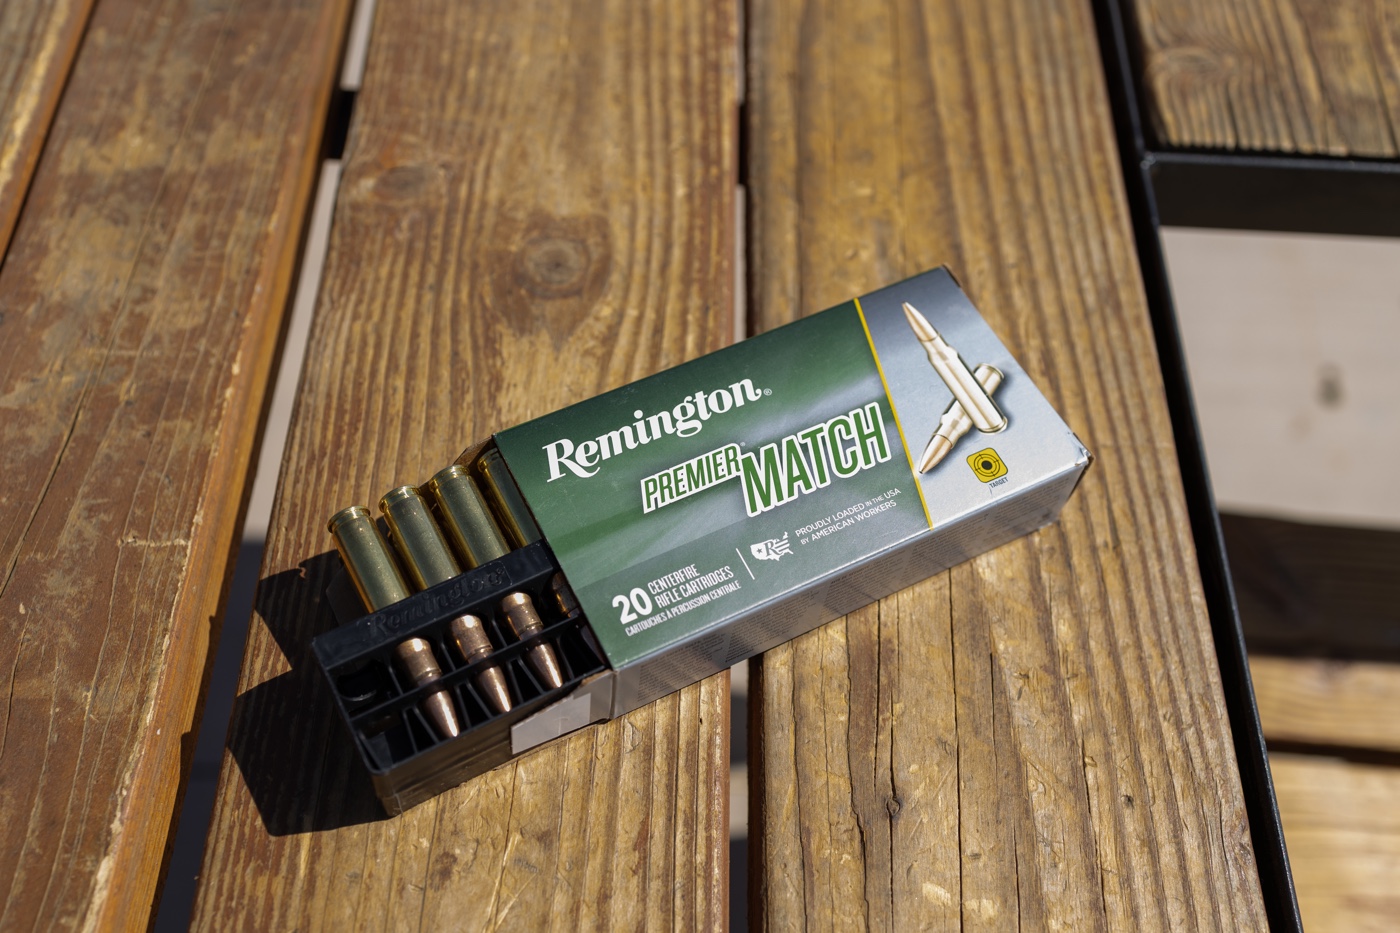 remington match ammo used in testing the model 2020 redline